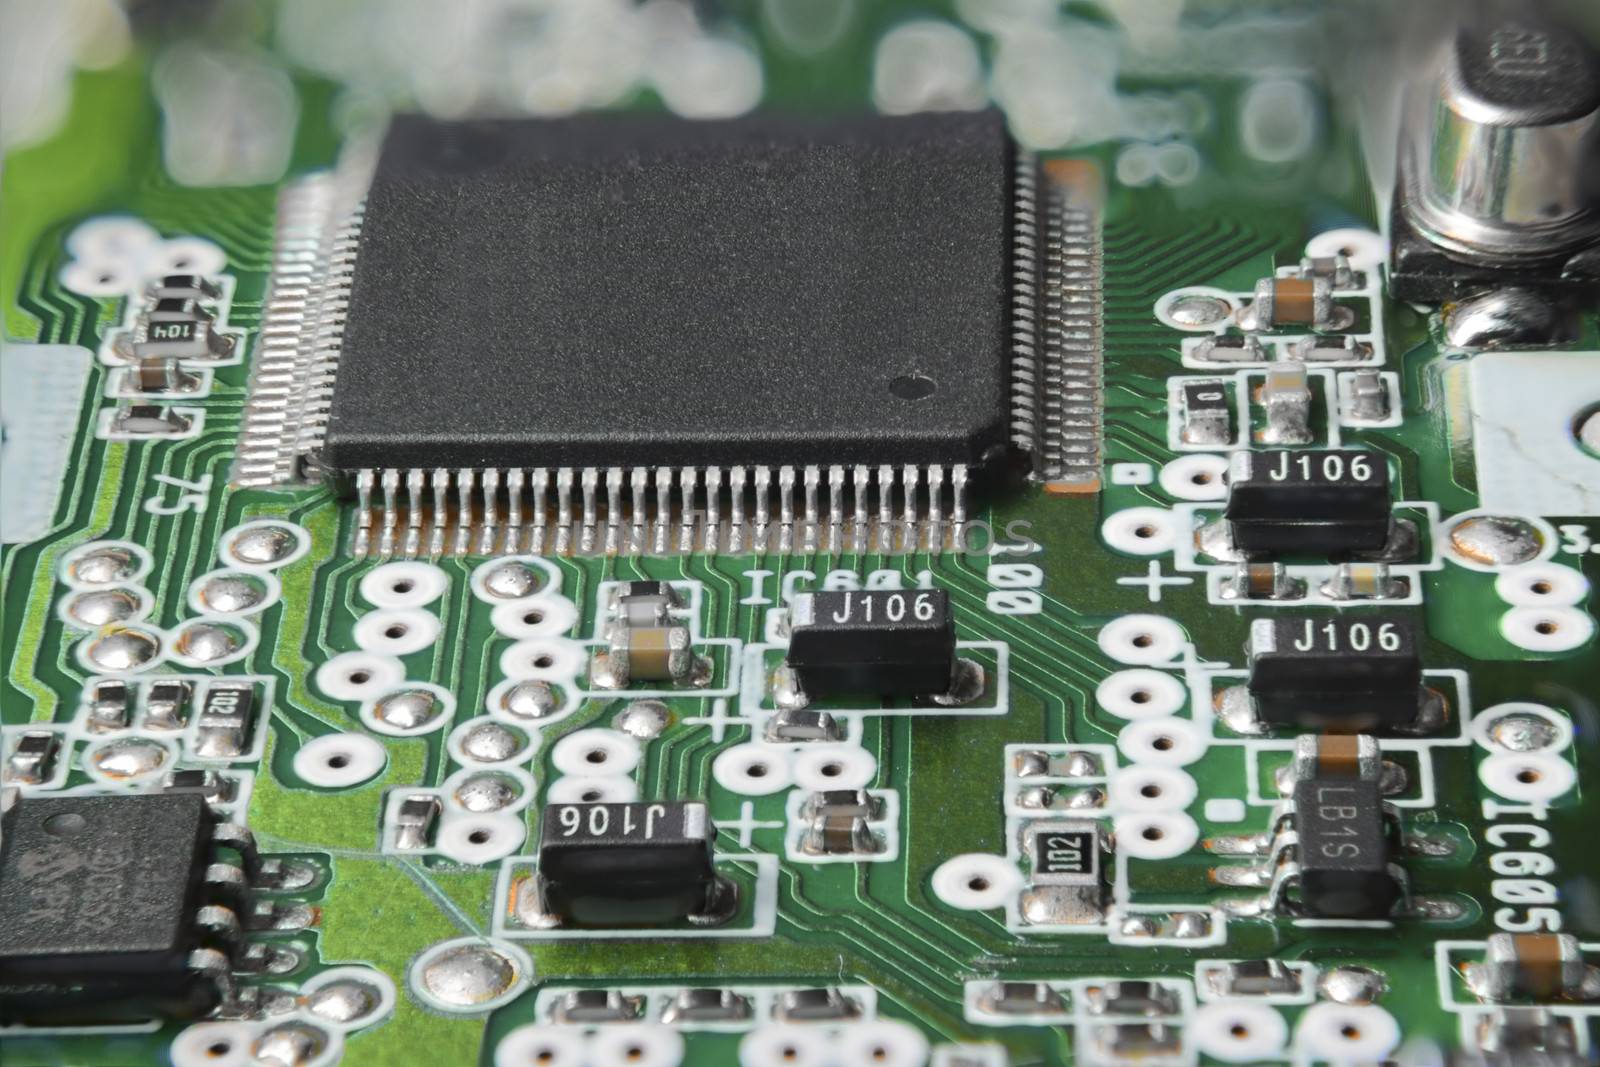 Circuit board with chips and microprocessor